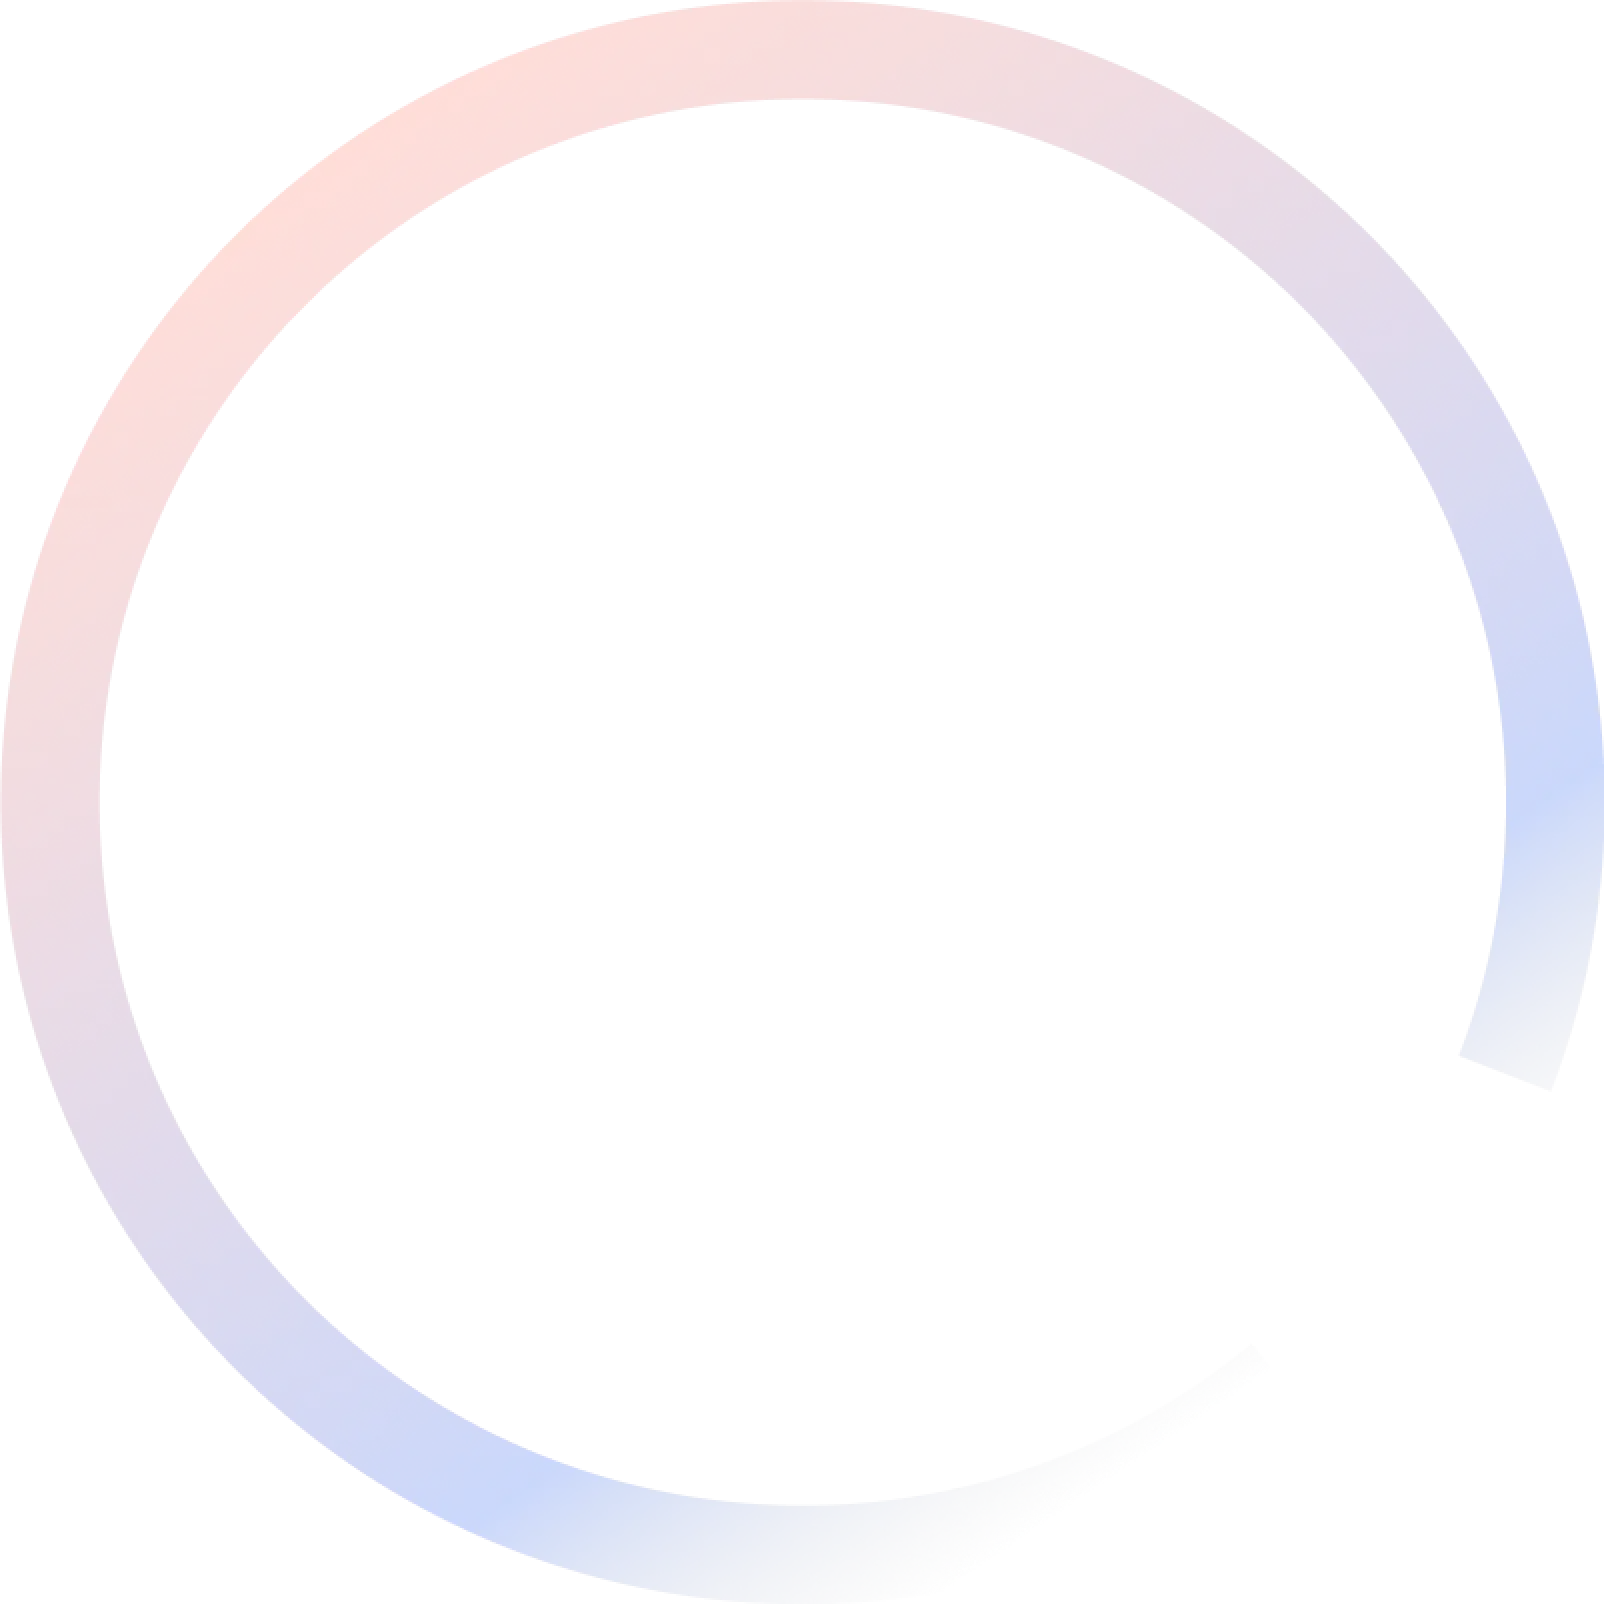 a circle consisting of different colors